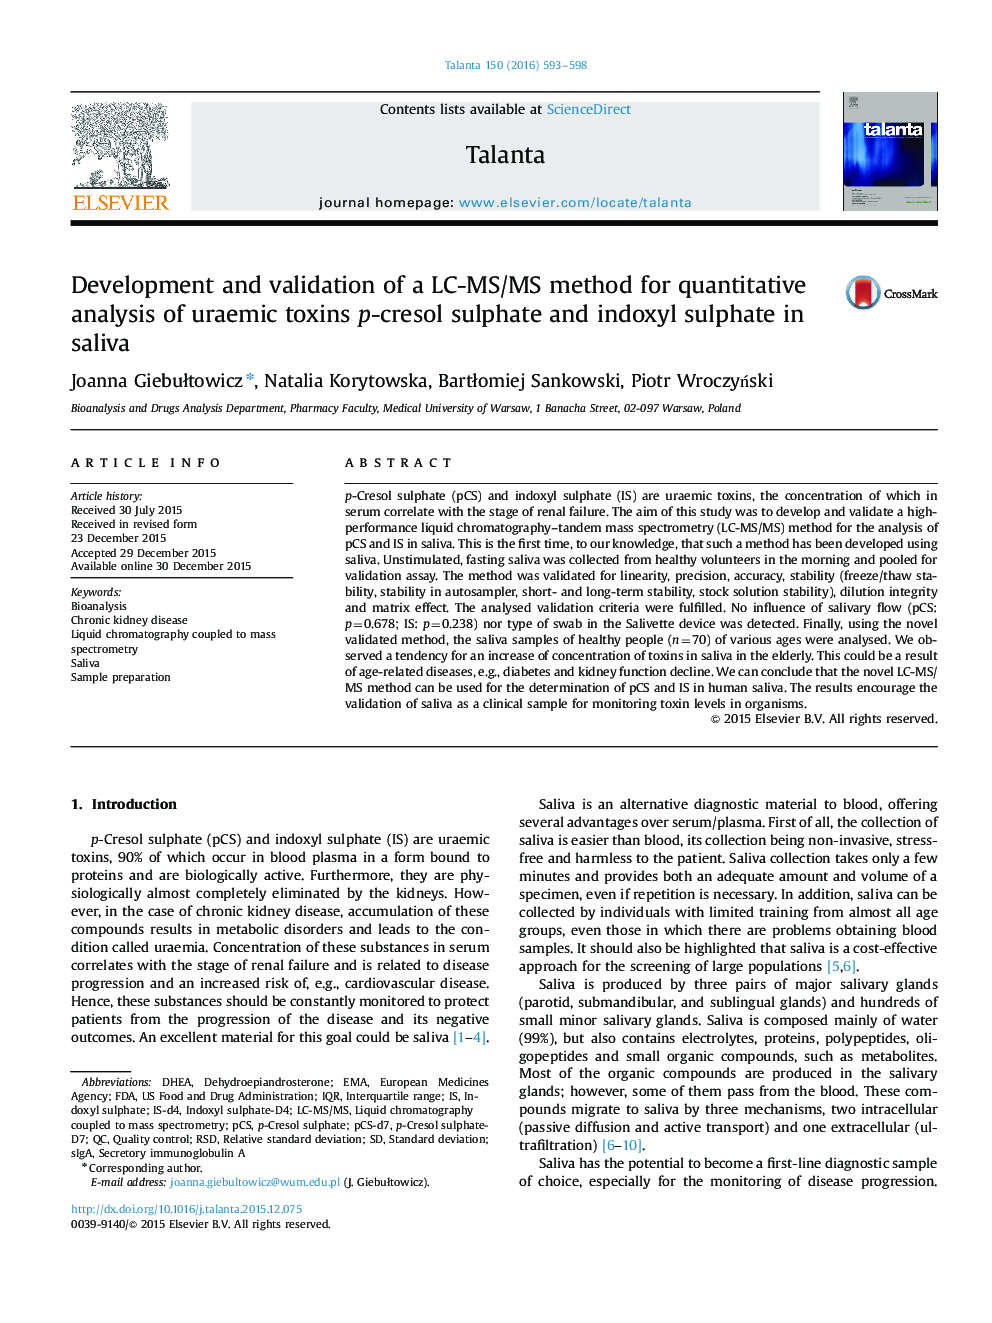 Development and validation of a LC-MS/MS method for quantitative analysis of uraemic toxins p-cresol sulphate and indoxyl sulphate in saliva